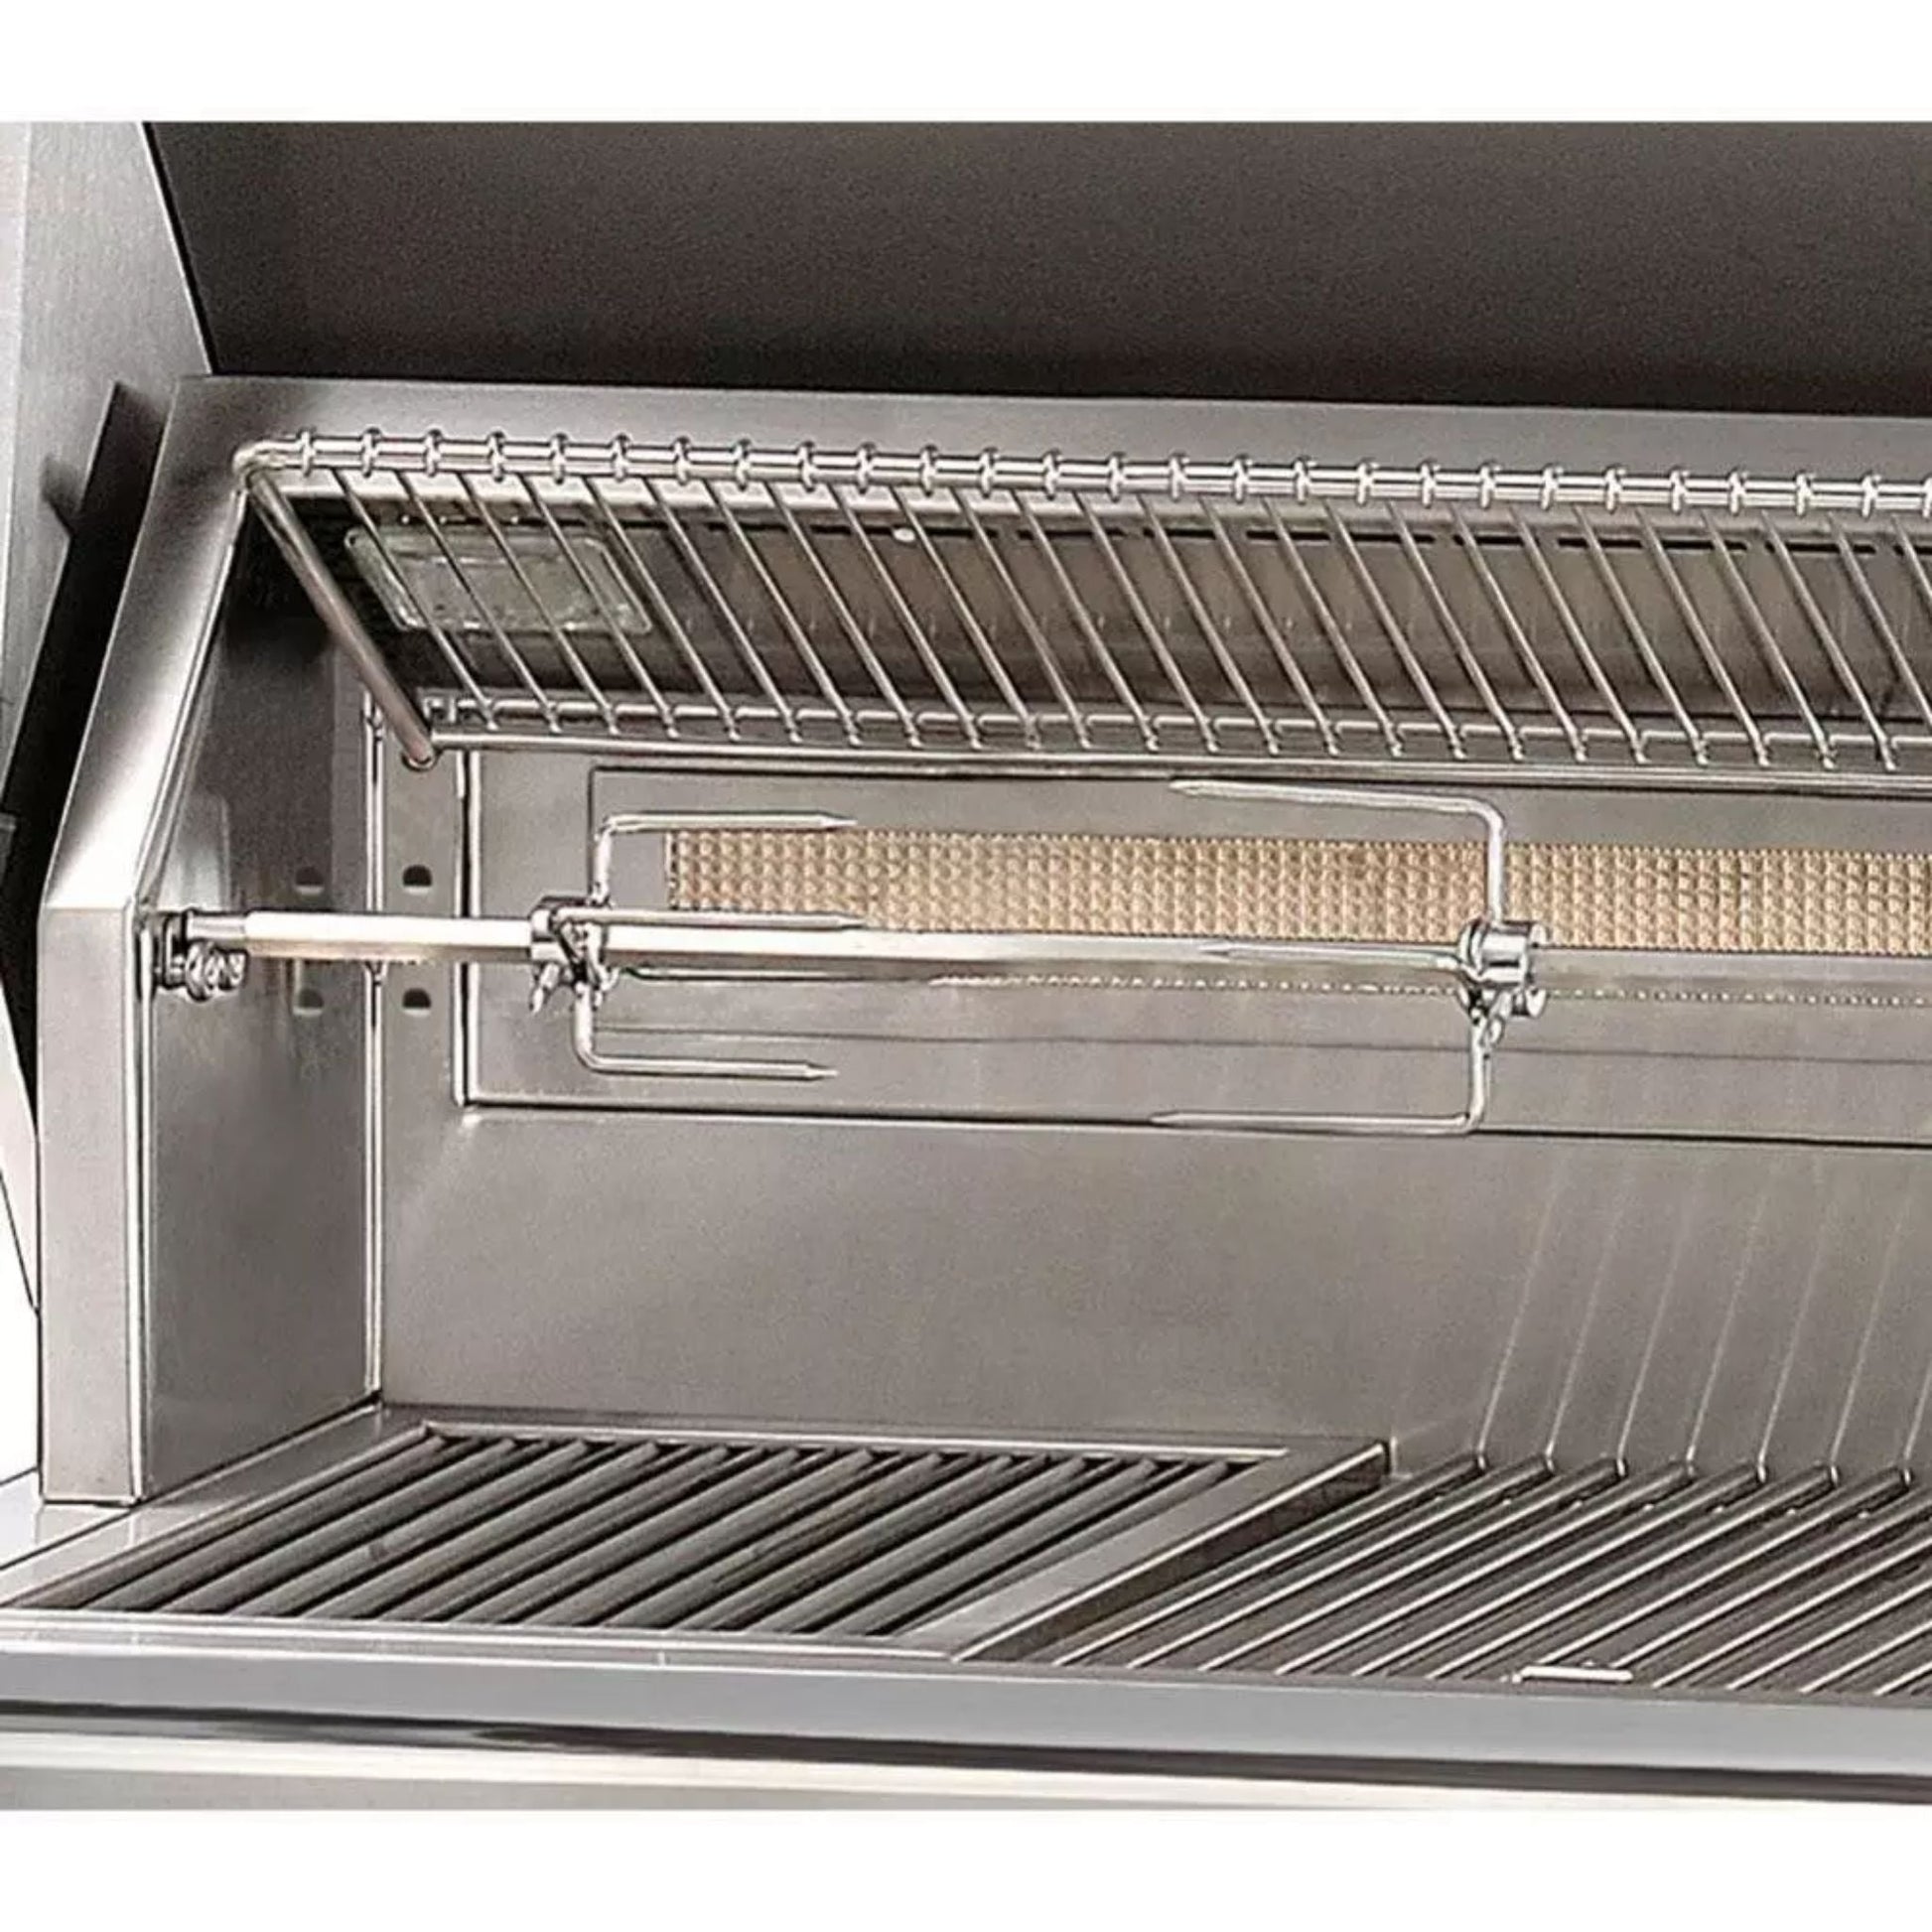 Alfresco Luxury 36" Stainless Steel Standard Grill Head 3 Burner Natural Gas Built-In Grill